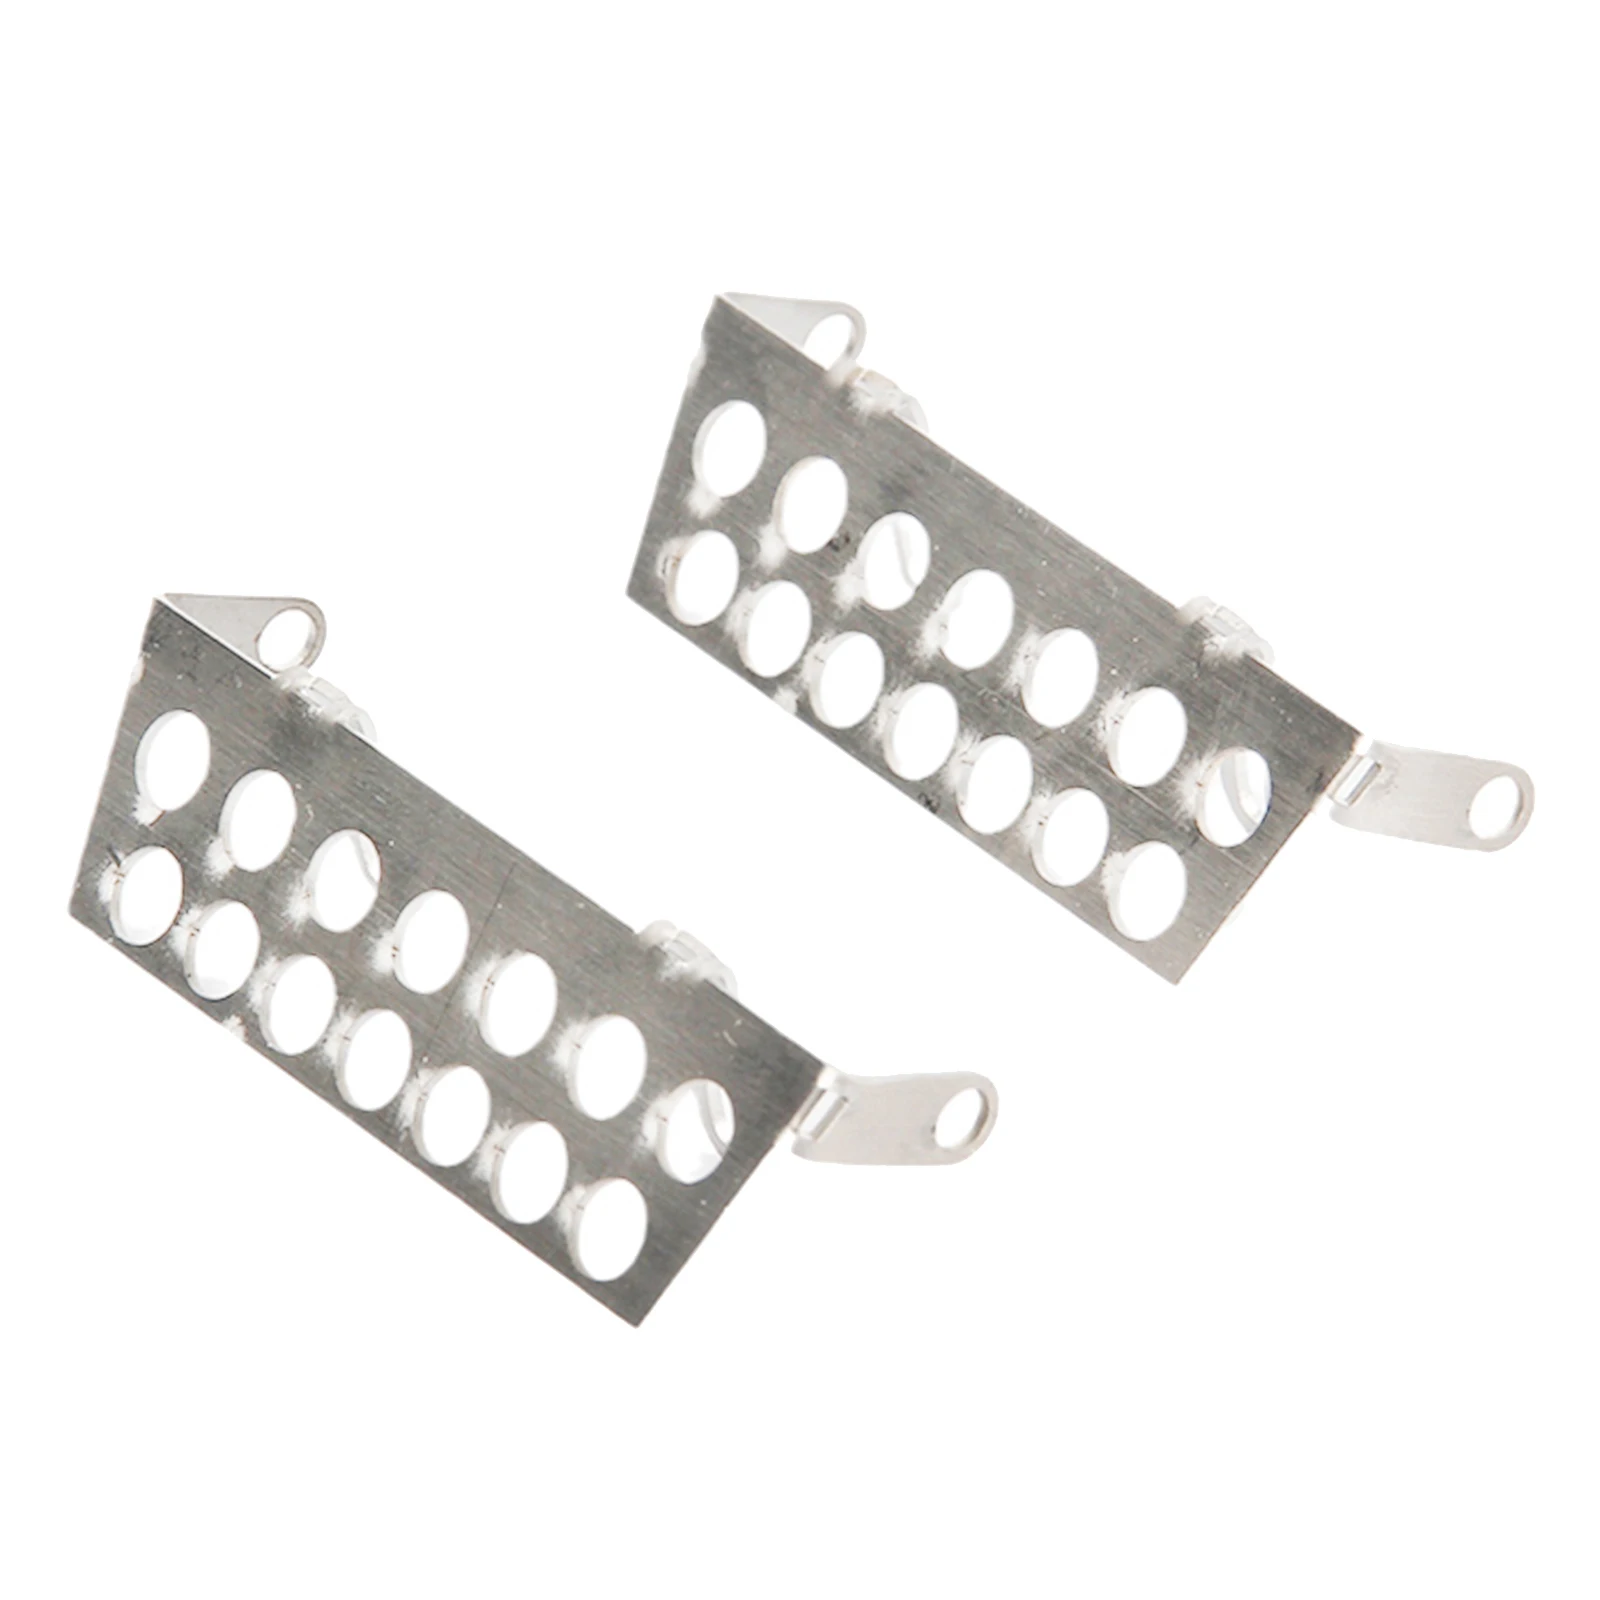 1Pairs RC Chassis Armor Chassis Armor Protection Plate Guard Chassis Armor for MN86 G500